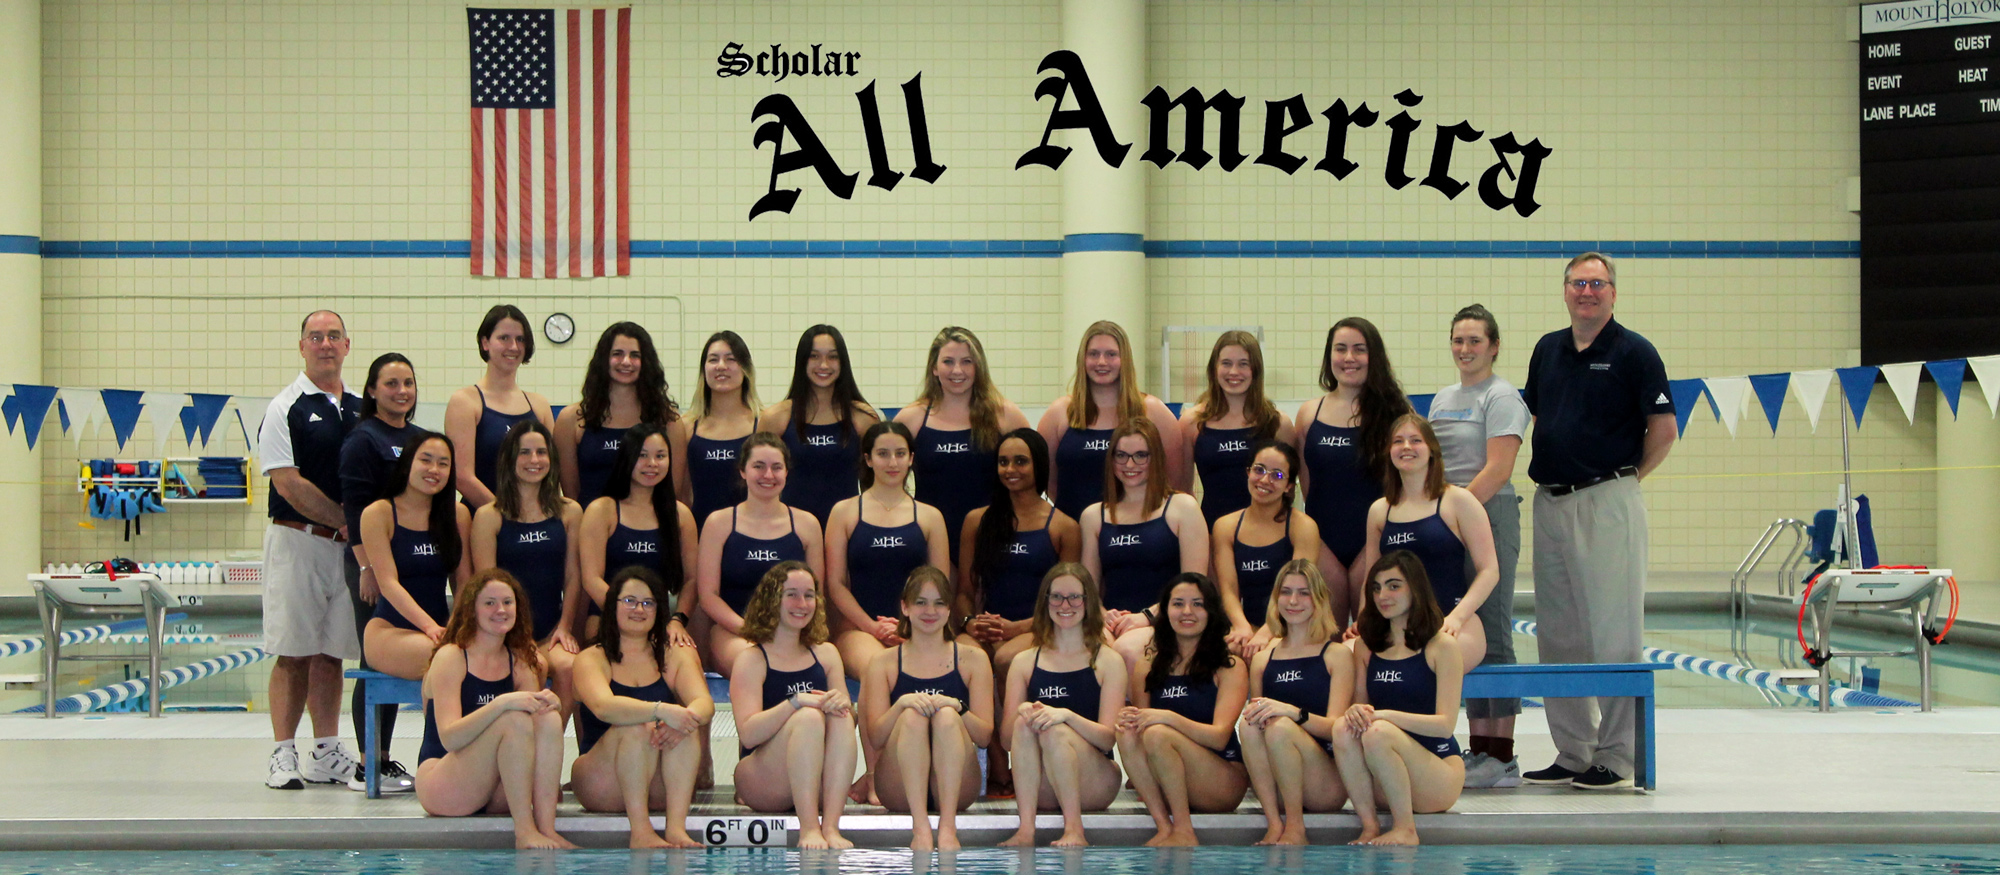 The 2022-23 Mount Holyoke swimming and diving team boasted a 3.76 average grade point average for the Spring 2023 semester.